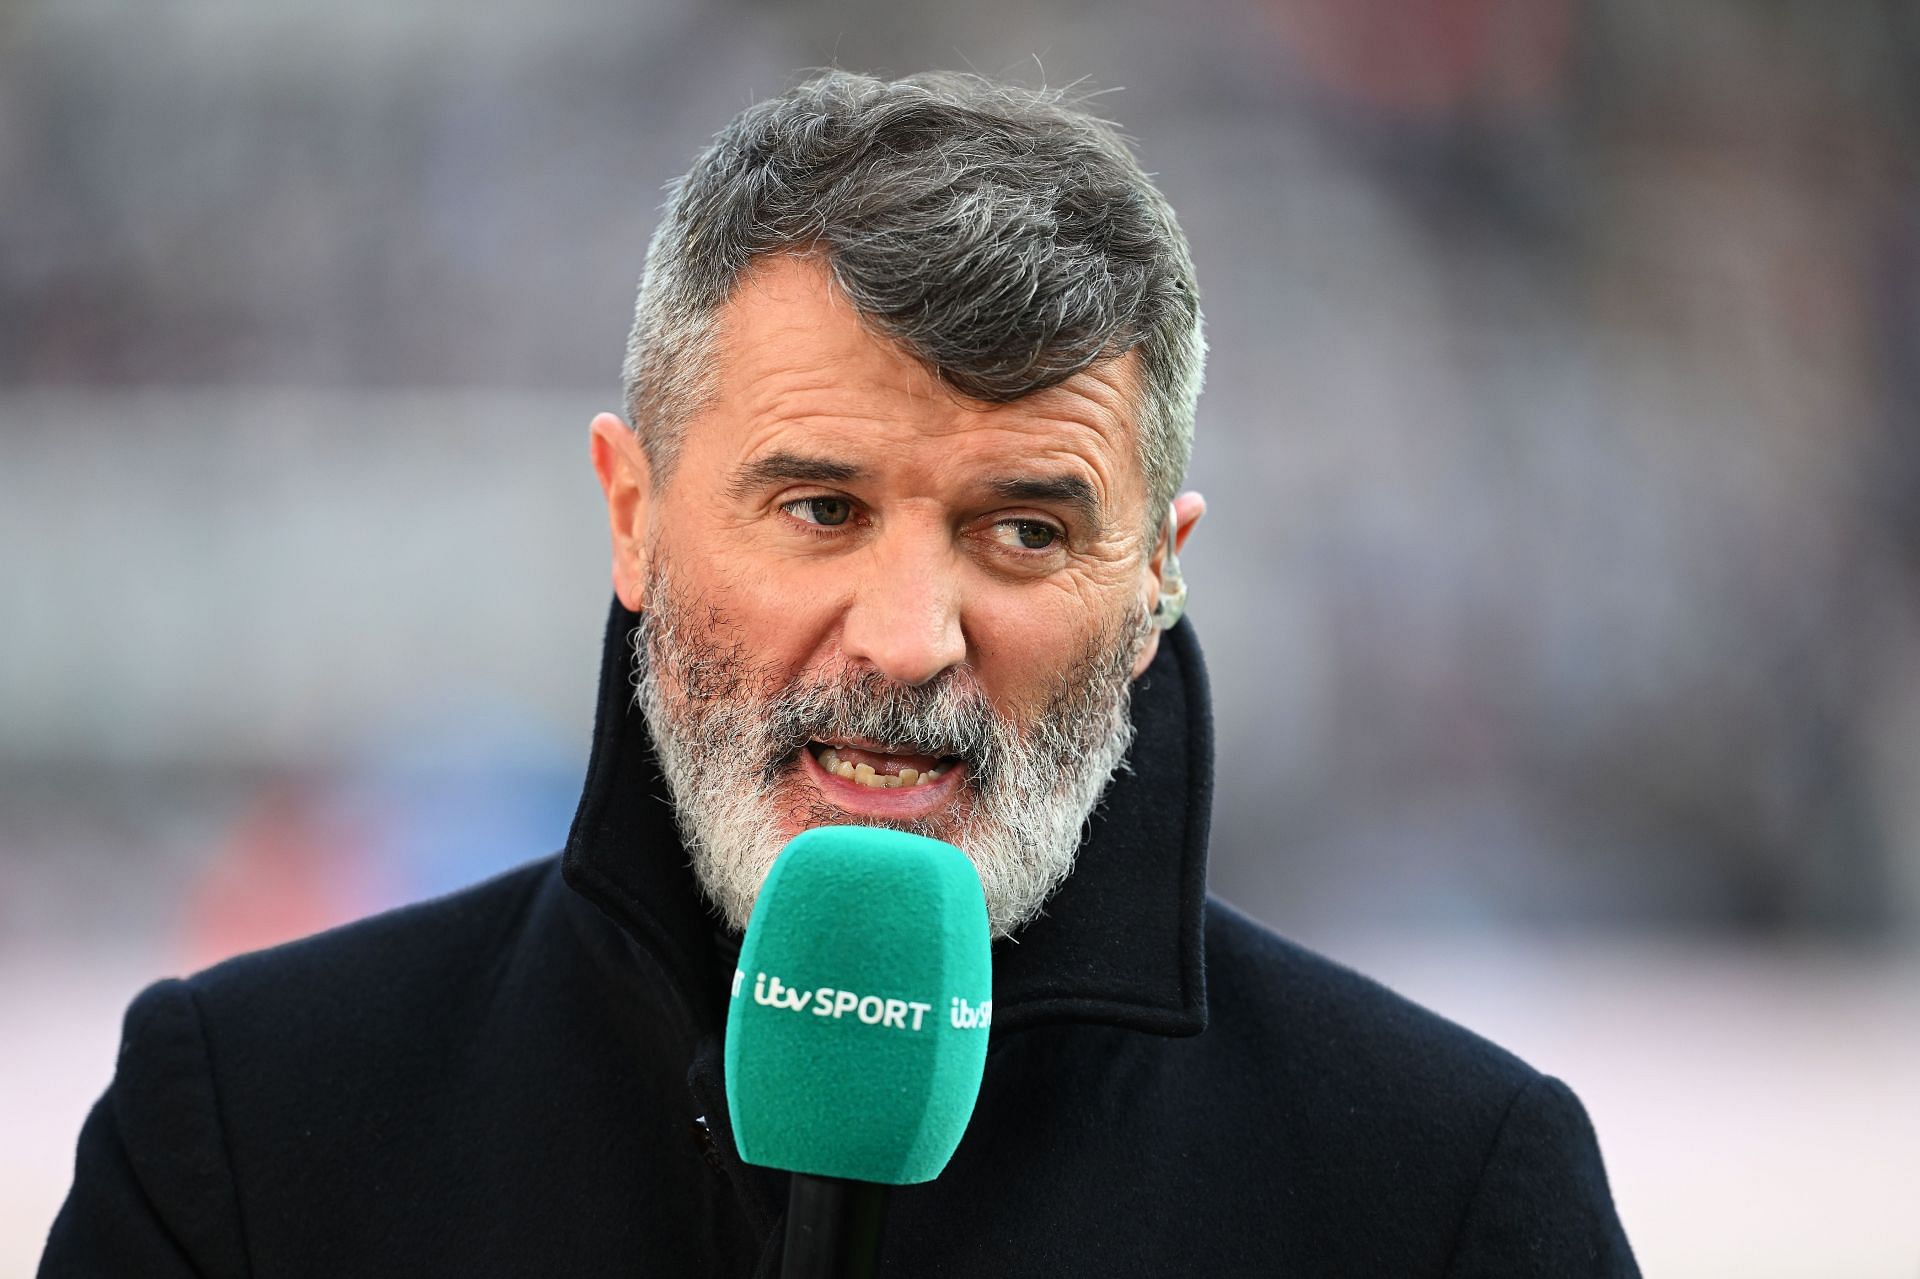 Arsenal fan who headbutted Manchester United legend Roy Keane charged with assault, set to appear in court next week